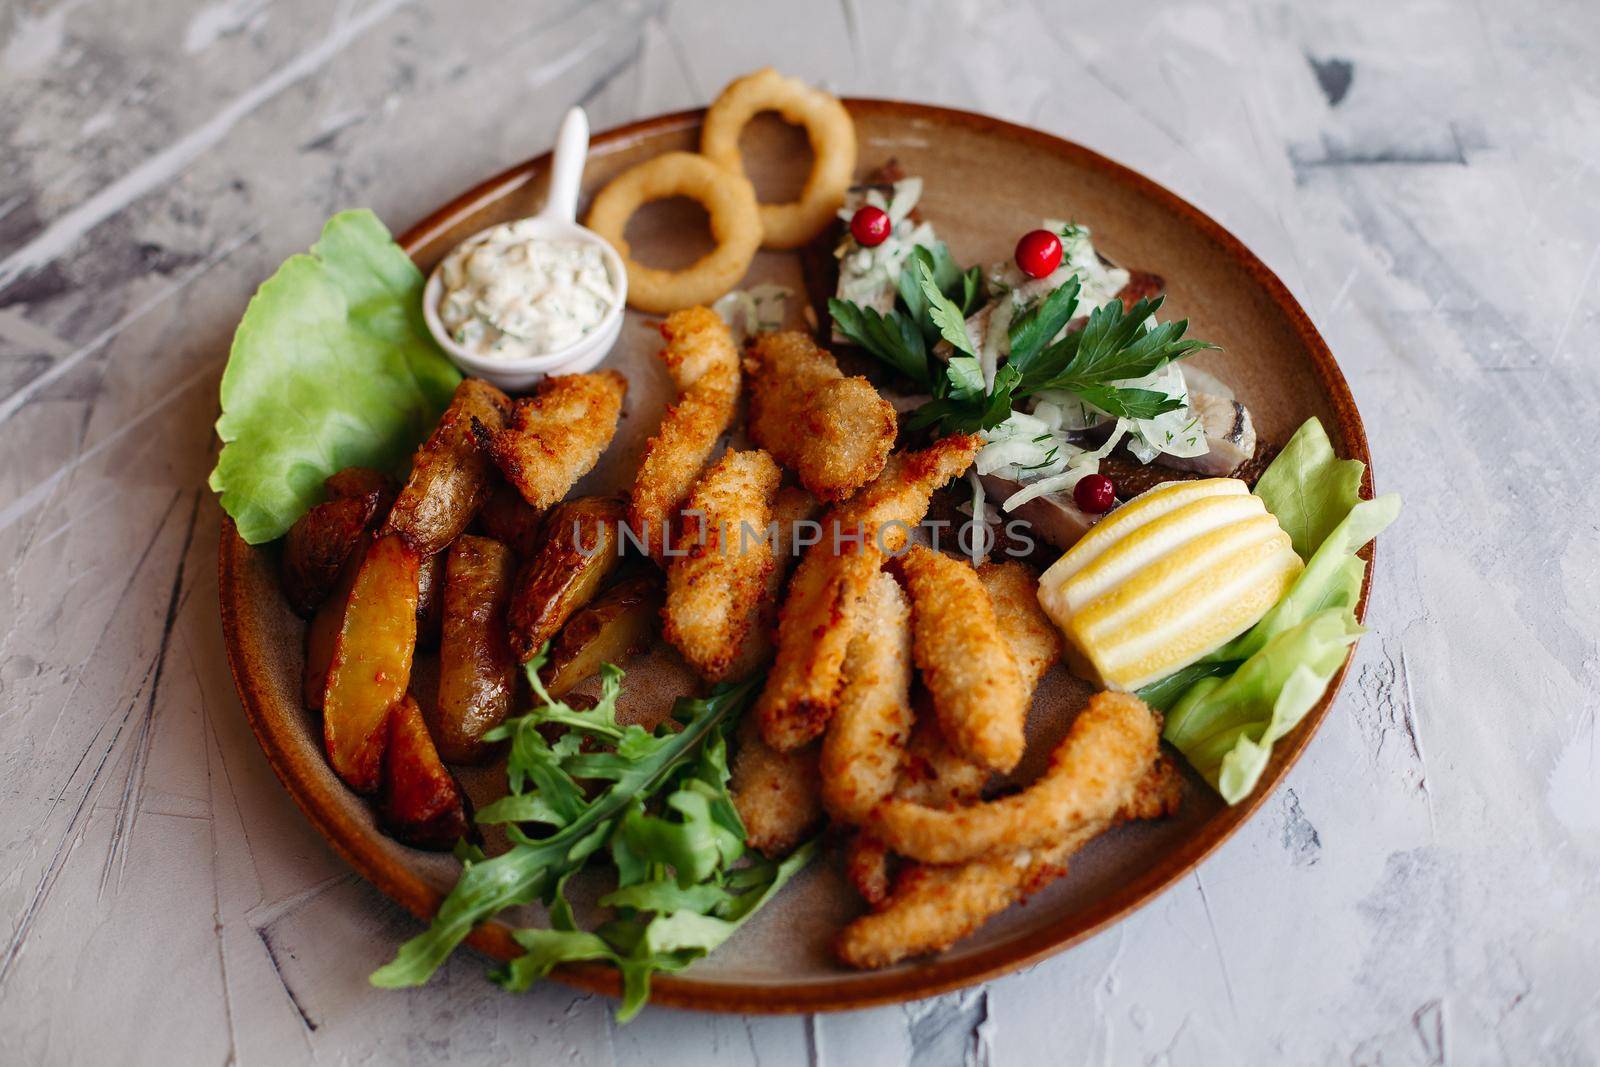 Clay plate full of appetizers including goldy chicken nuggets with chrispy crust, delicious canapes with herring and cherry tomatoes, served with garlic sauce, decorated with salad leaves and cheese.